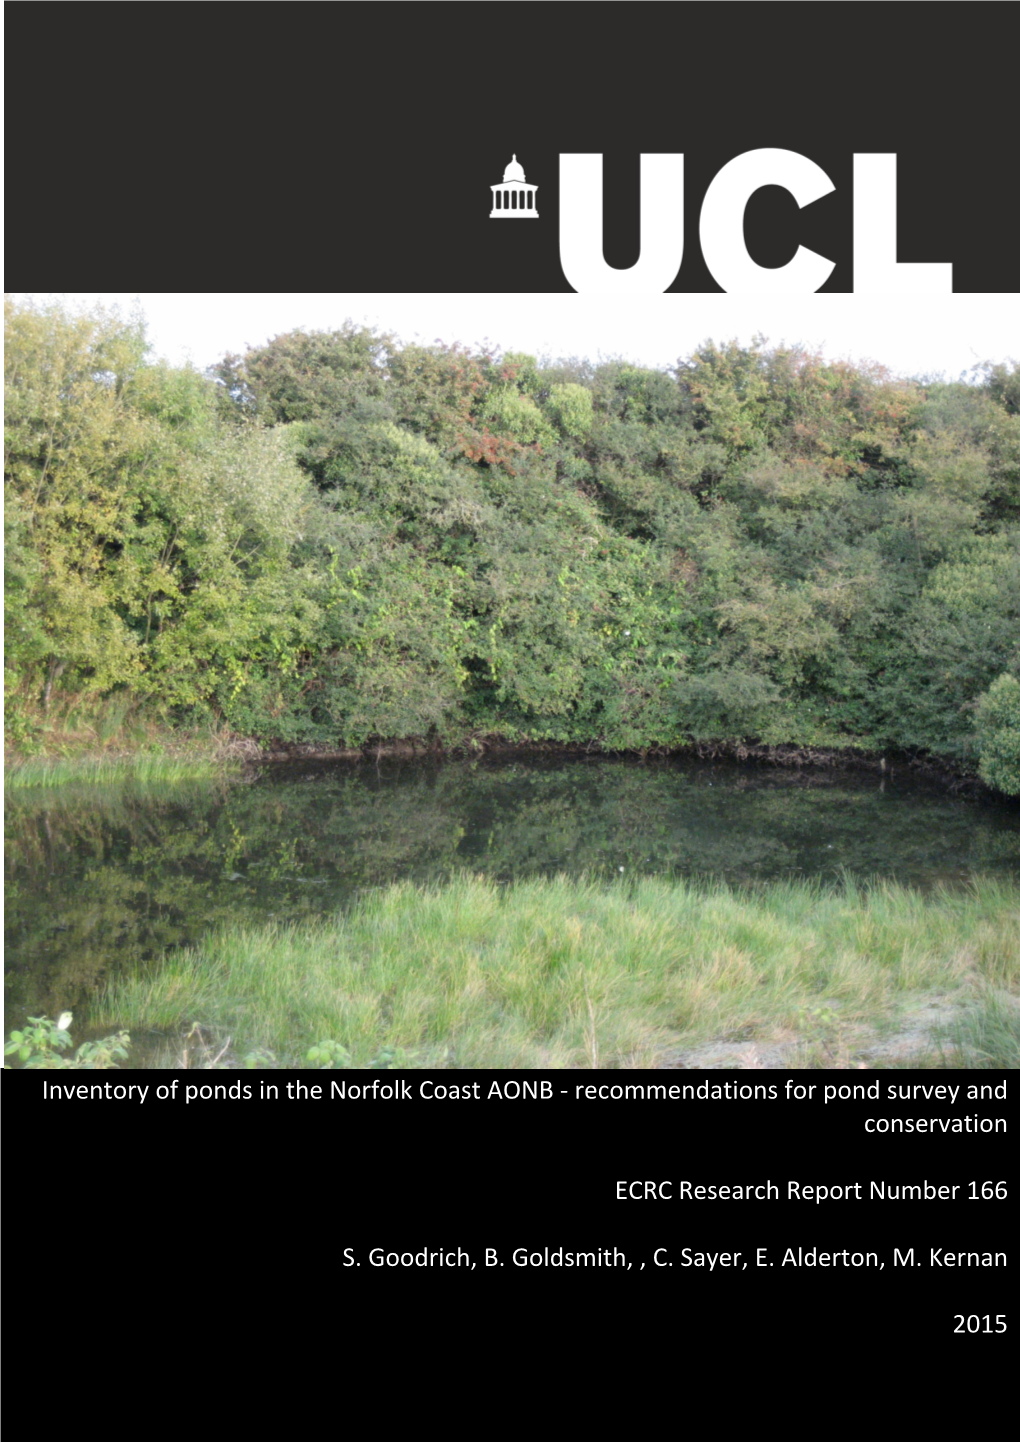 Inventory of Ponds in the Norfolk Coast AONB - Recommendations for Pond Survey and Conservation